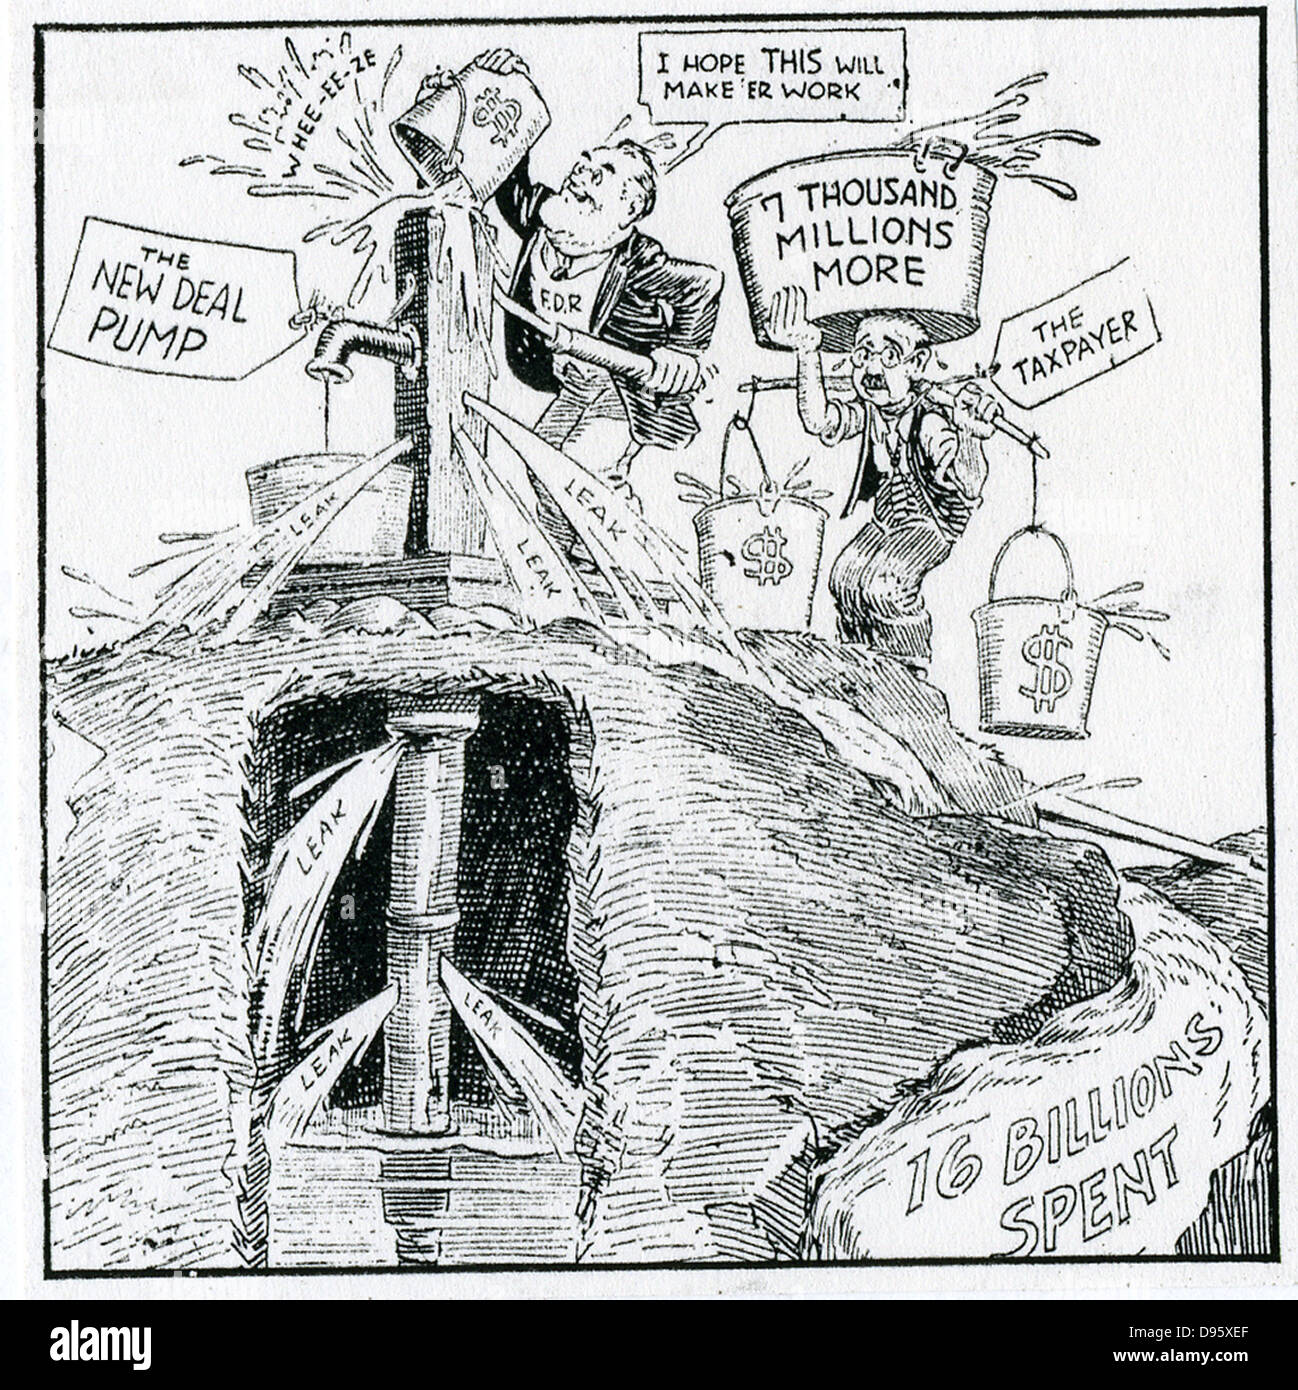 The American Depresseion 1930s. 'What We Need is a New Pump' cartoon on Franklin Delano Roosevelt's New Deal and the pump priming deficits. While FDR poured 8 1/2 billion US Dollars into the emergency, insisting he was balancing the budget. Stock Photo